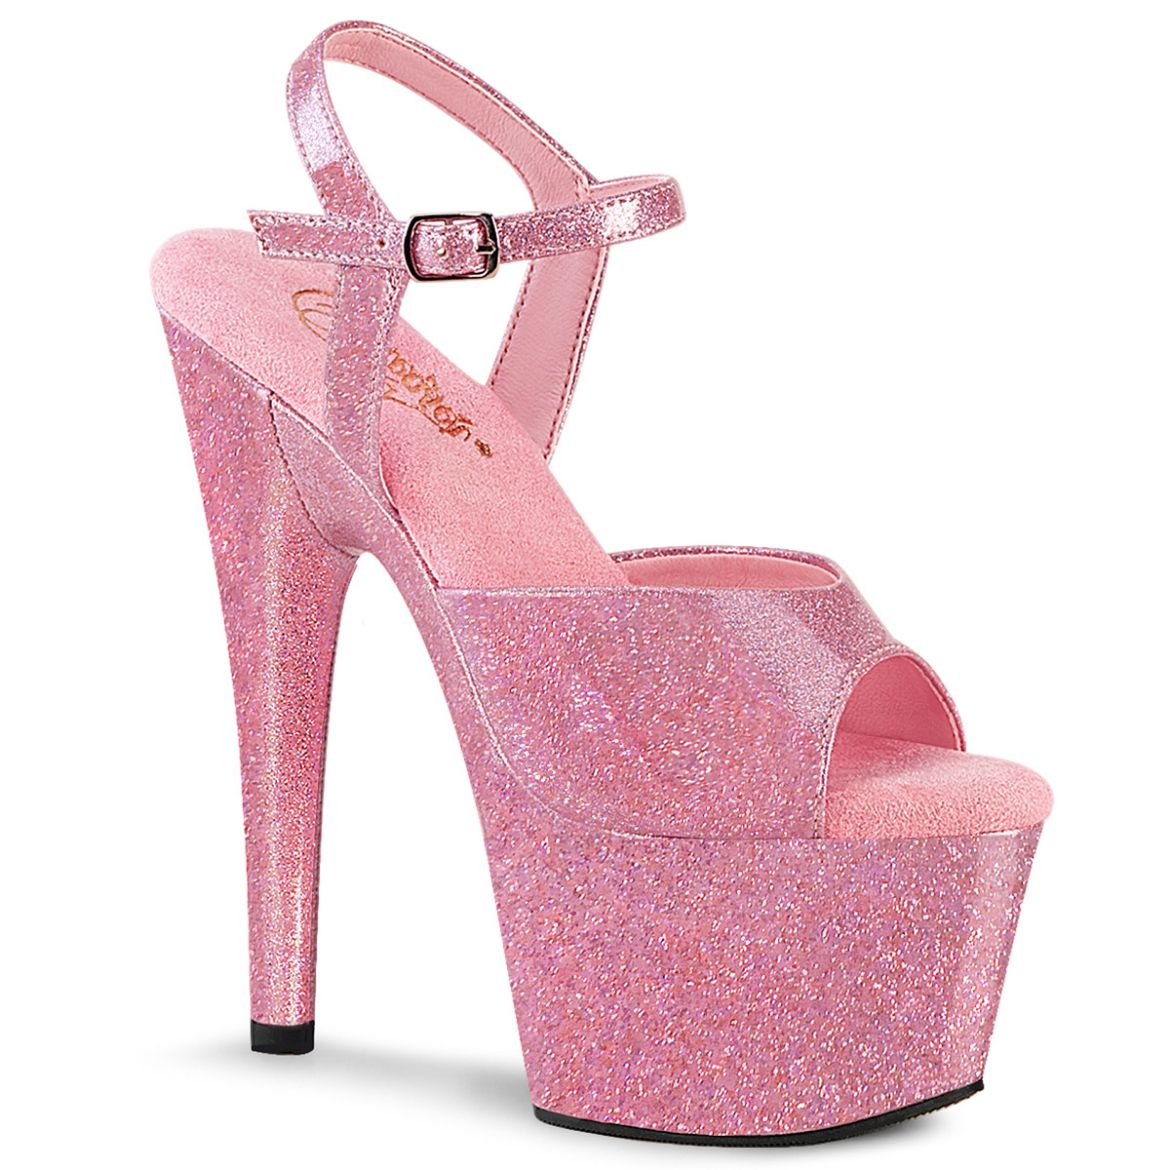 Product image of Pleaser ADORE-709GP B. Pink Glitter Pat/M 7 Inch Heel 2 3/4 Inch PF Ankle Strap Sandal